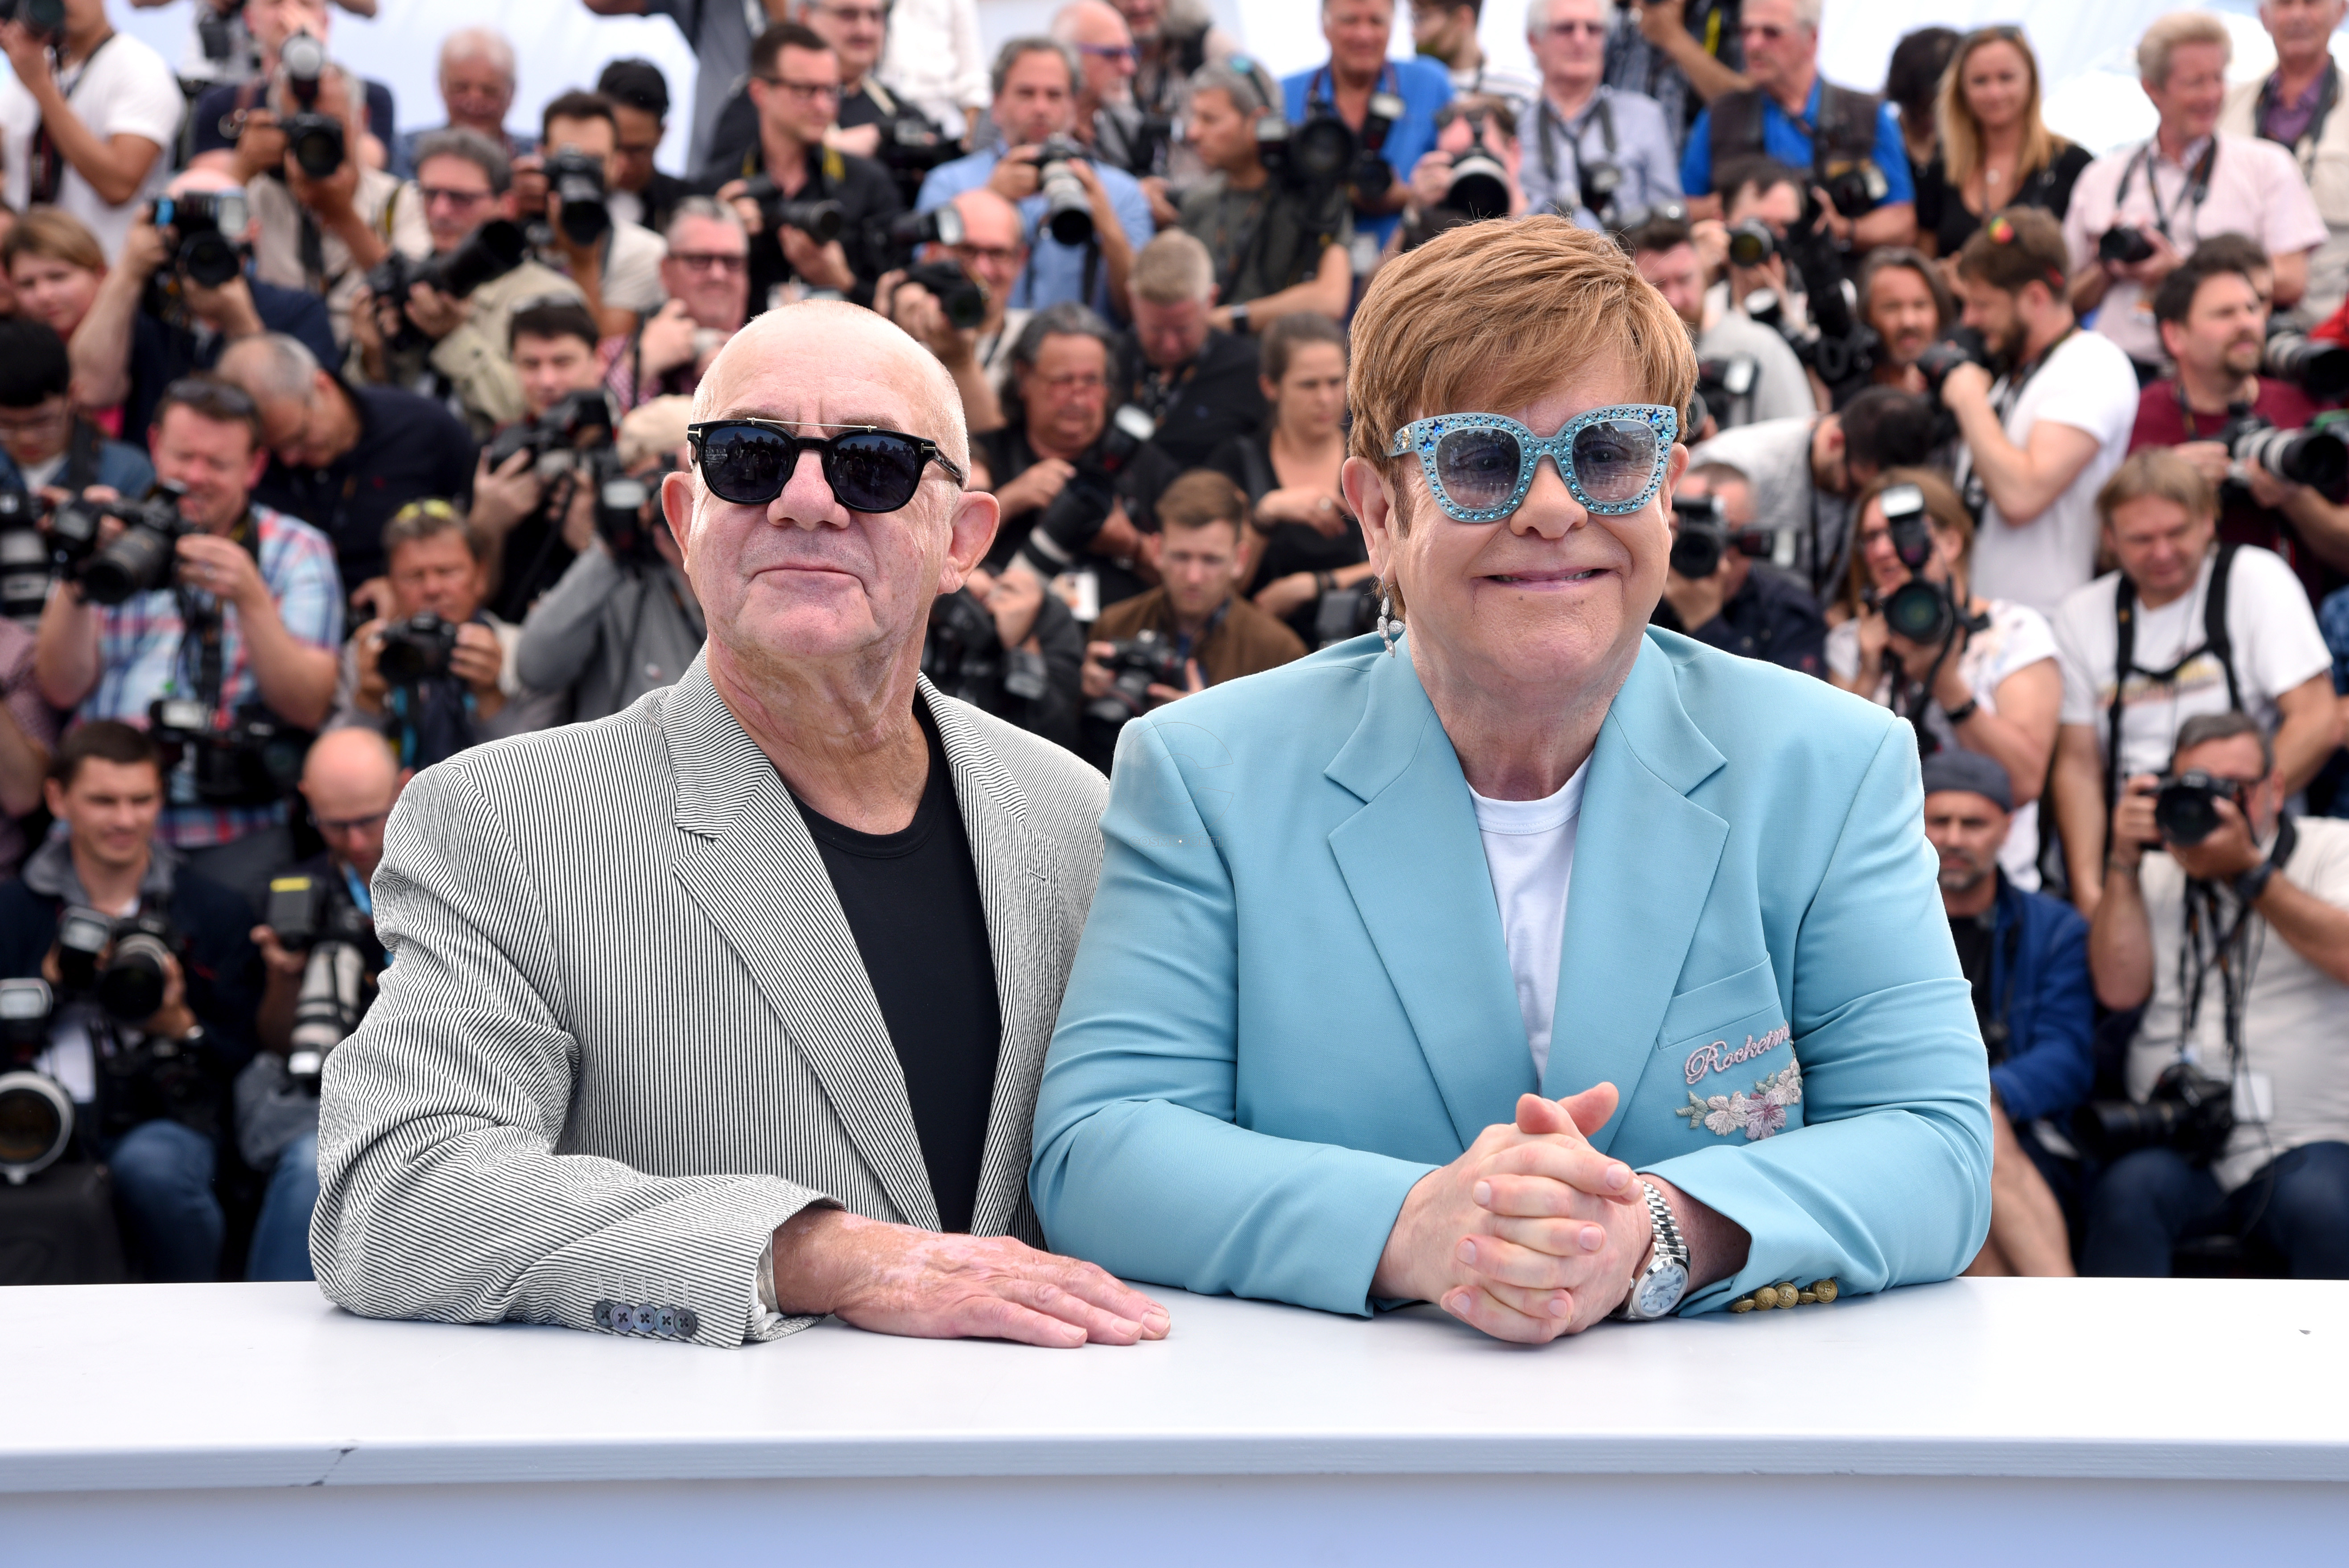 CANNES, FRANCE  - MAY 16: (L-R) Bernie Taupin and Elton John attend the "Rocketman" Photocall during the 72nd annual Cannes Film Festival on May 16, 2019 in Cannes, France. (Photo by Serge Arnal/Paramount)